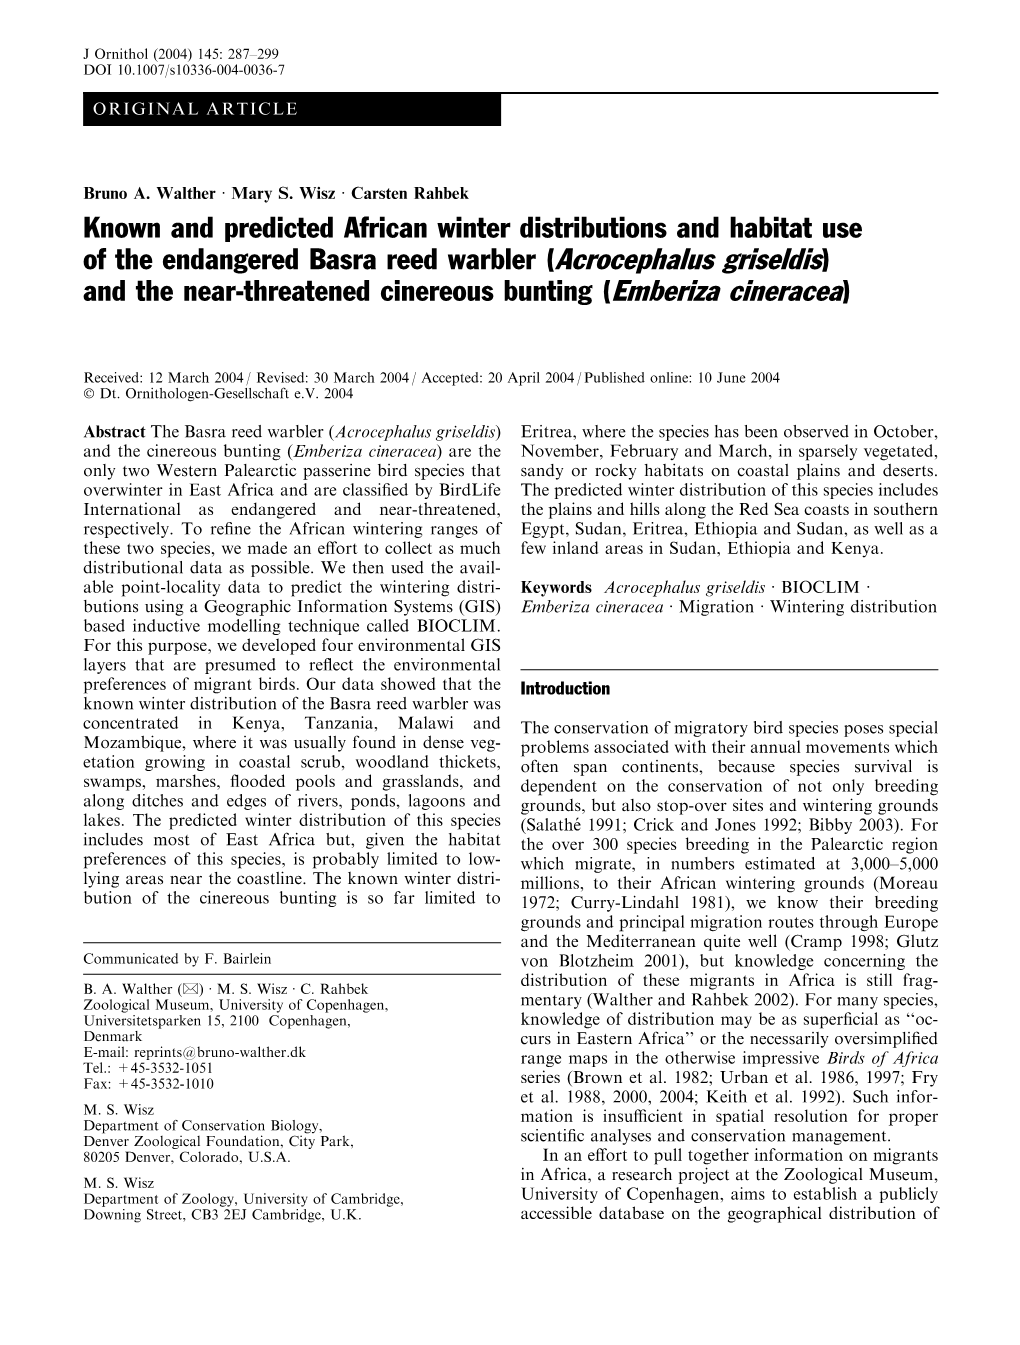 Known and Predicted African Winter Distributions and Habitat Use of The